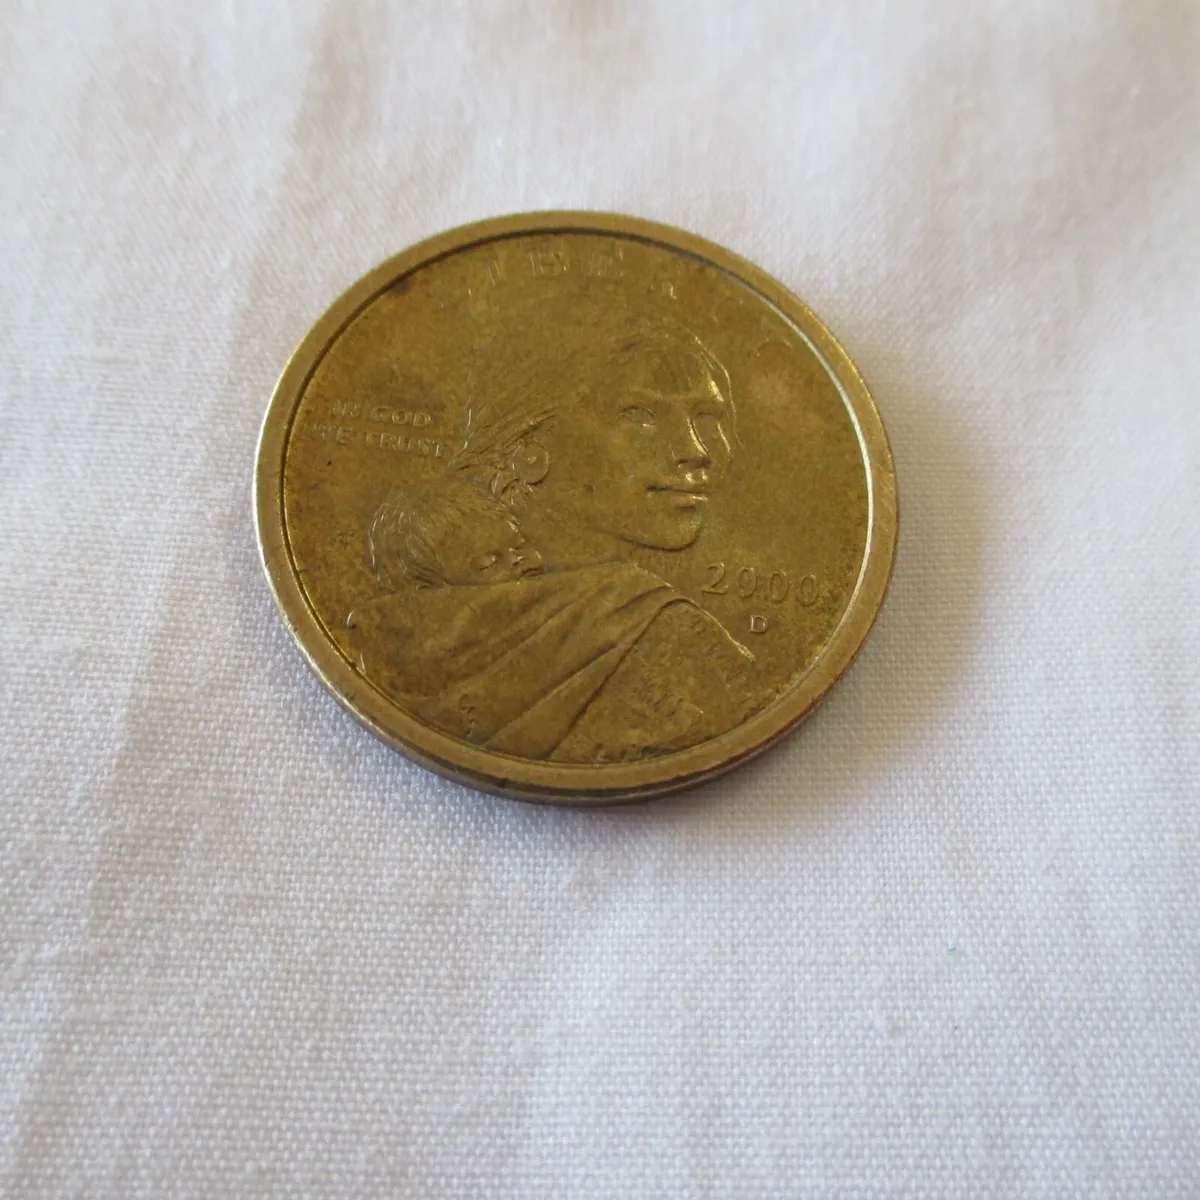 Learn to Identify the Rare Cheerios Dollar Coin